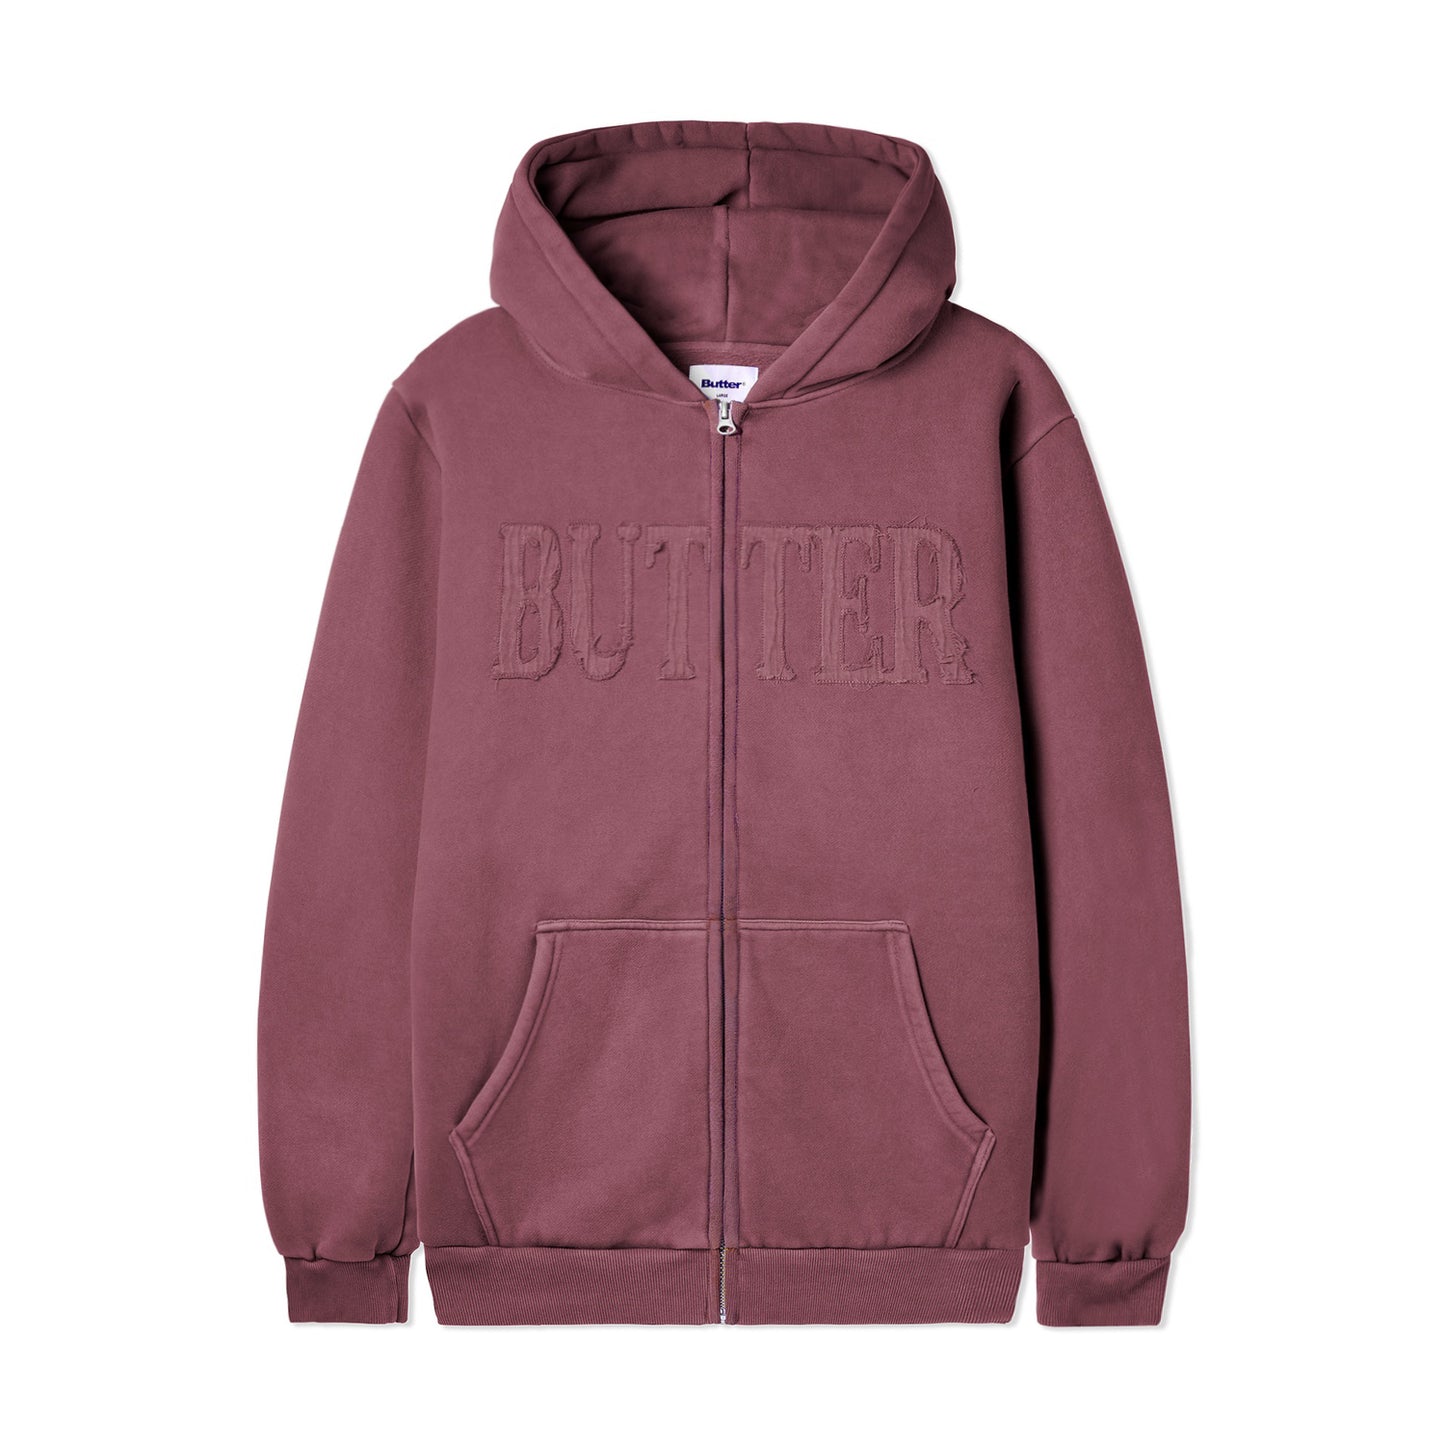 Butter Goods Fabric Applique Zip Hoodie Washed Rhubarb